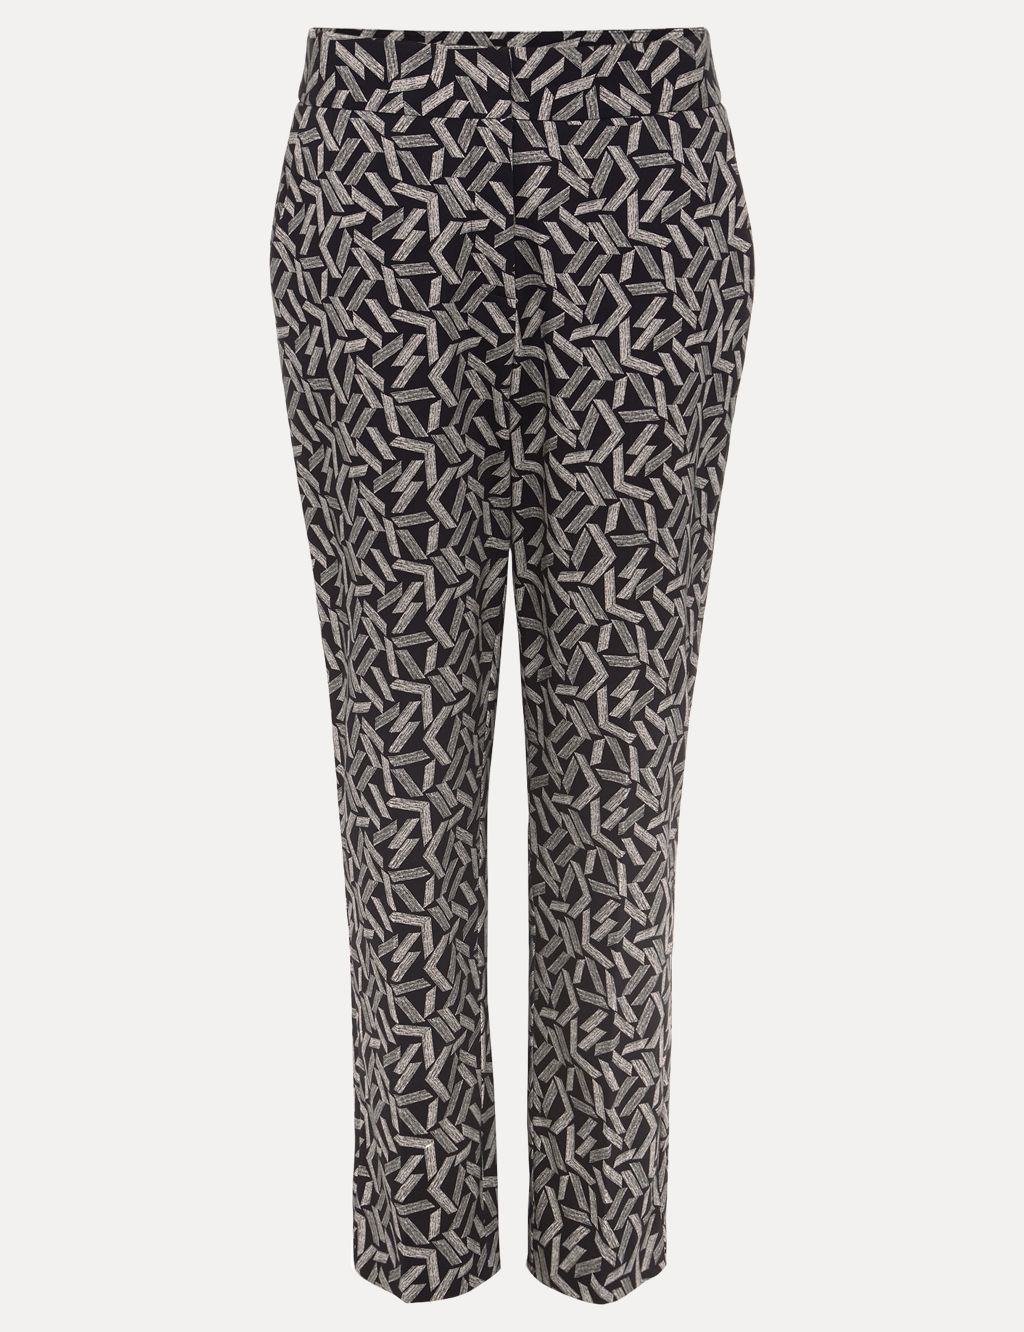 Cotton Rich Printed Slim Fit Trousers image 2